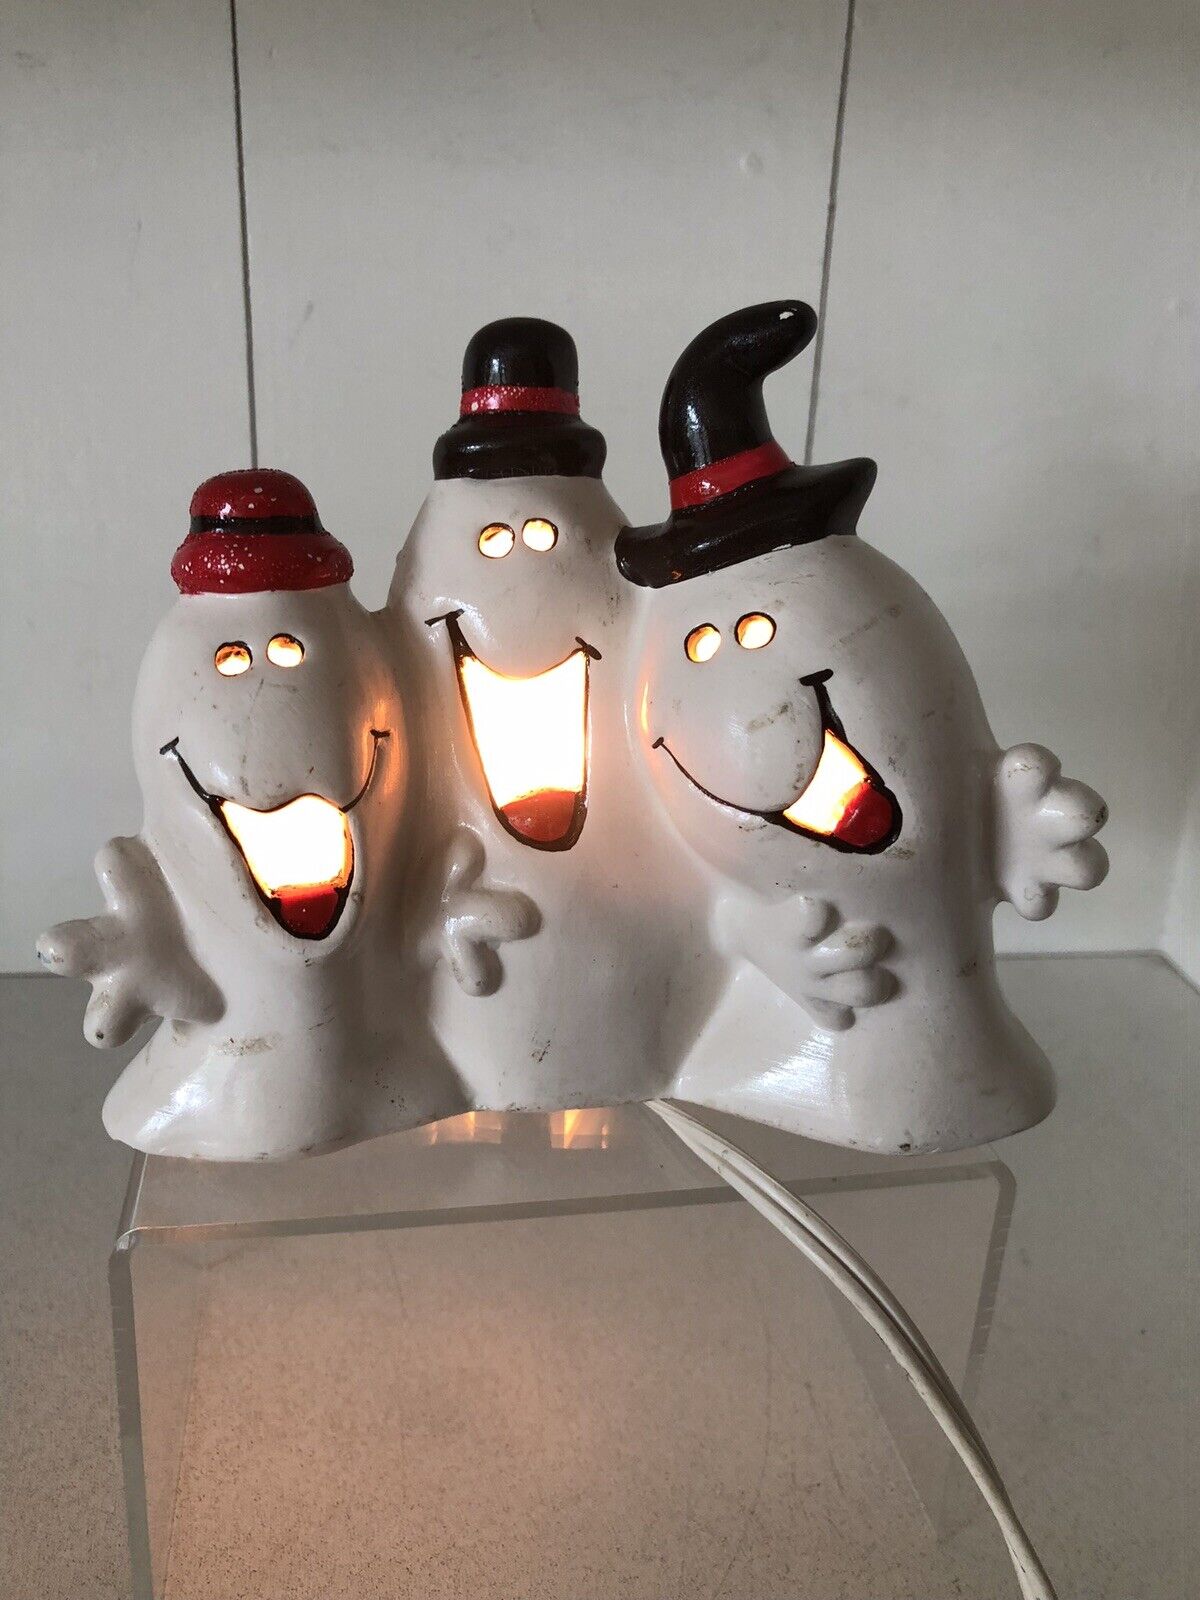 Vintage Ceramic Three Laughing Ghosts In Hats Light Up Halloween Whimsical Decor